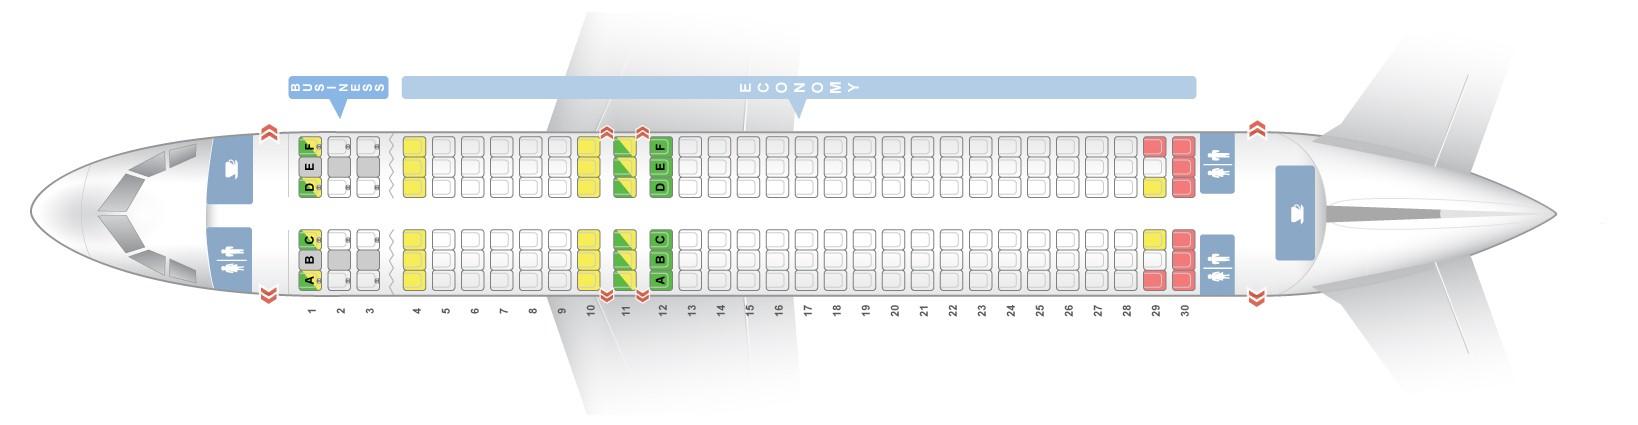 Seat map Airbus A320-200 Brussels Airlines. Best seats in the plane